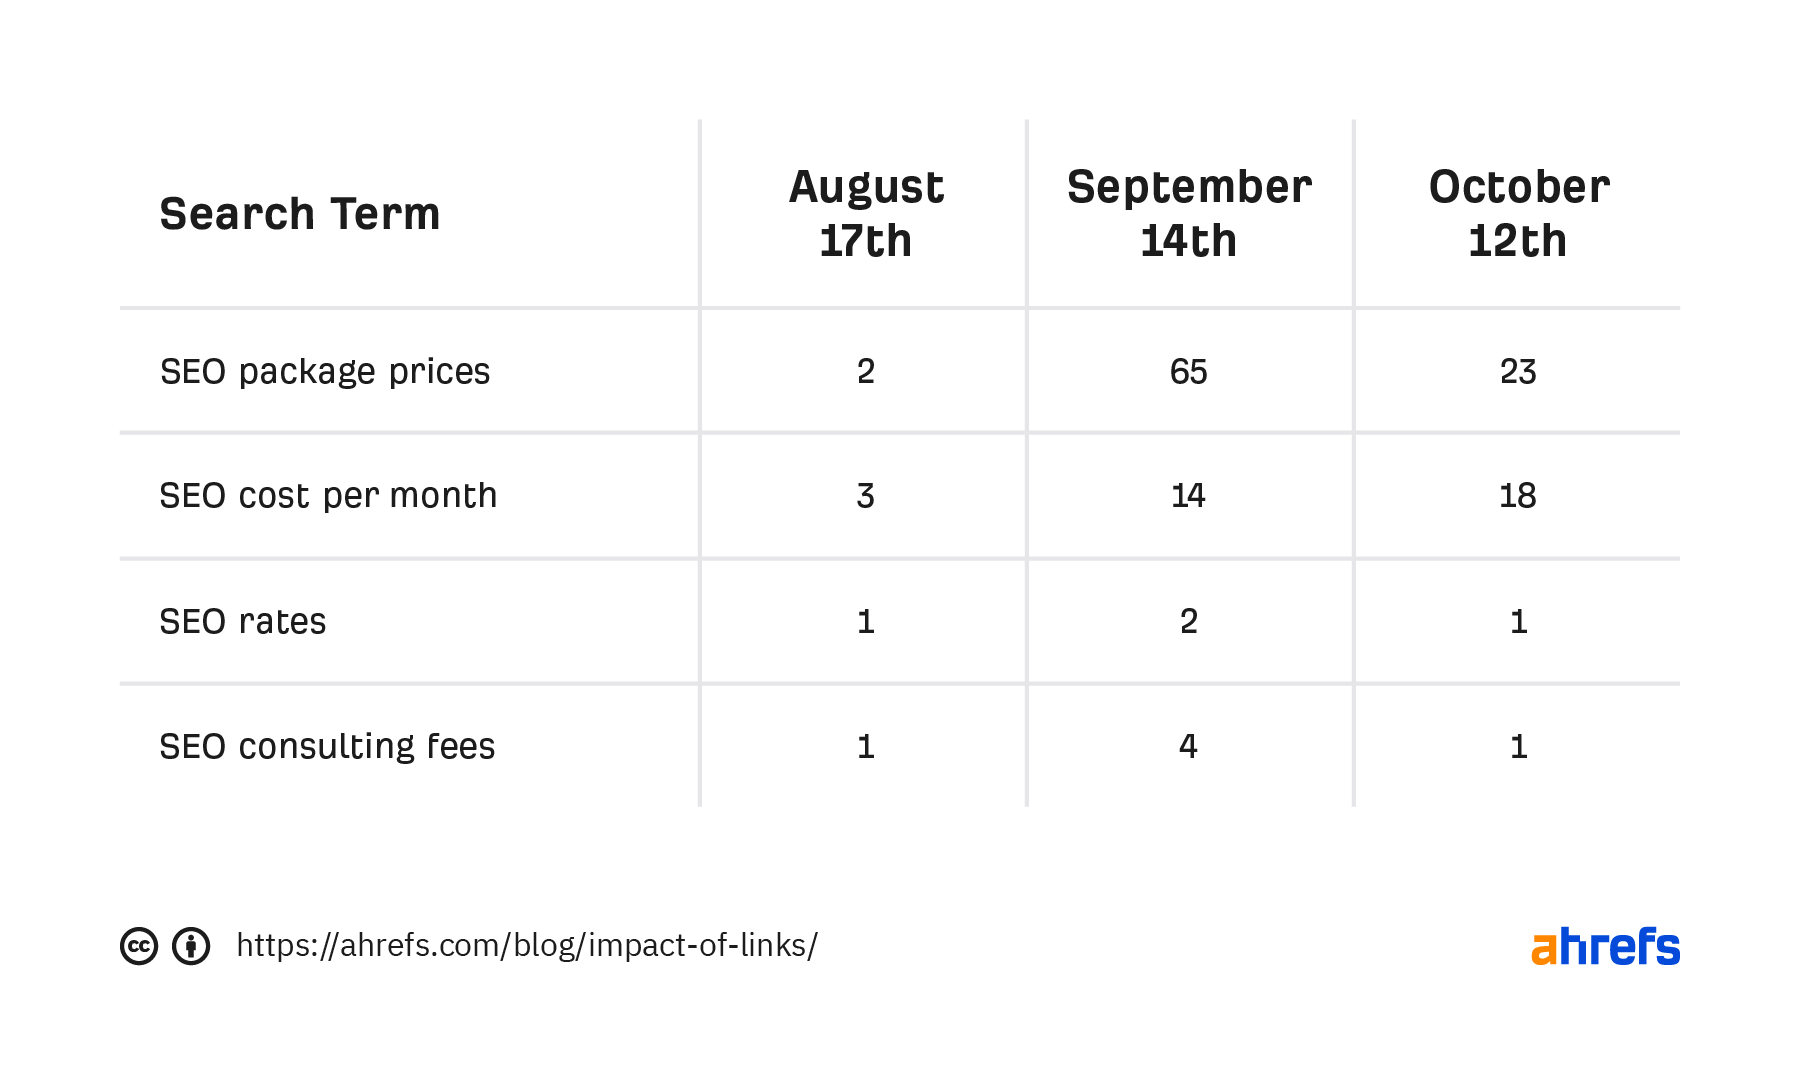 List of terms and corresponding ranking changes on Aug 17, Sept 14, and Oct 12